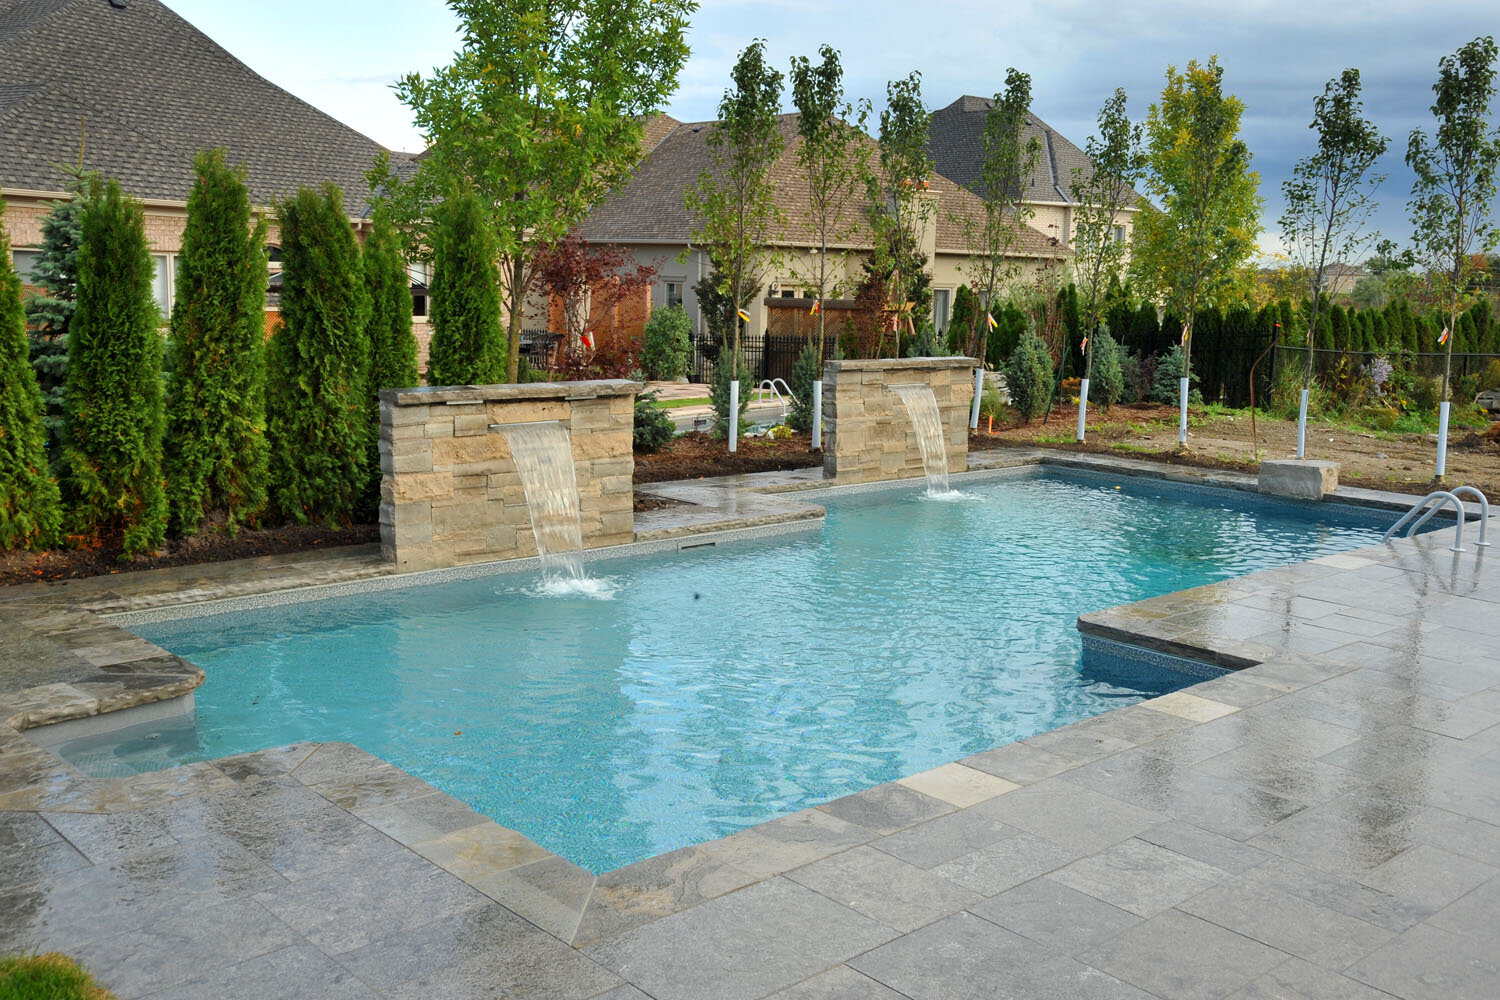 Creative Pools Landscaping, Pool And Landscaping